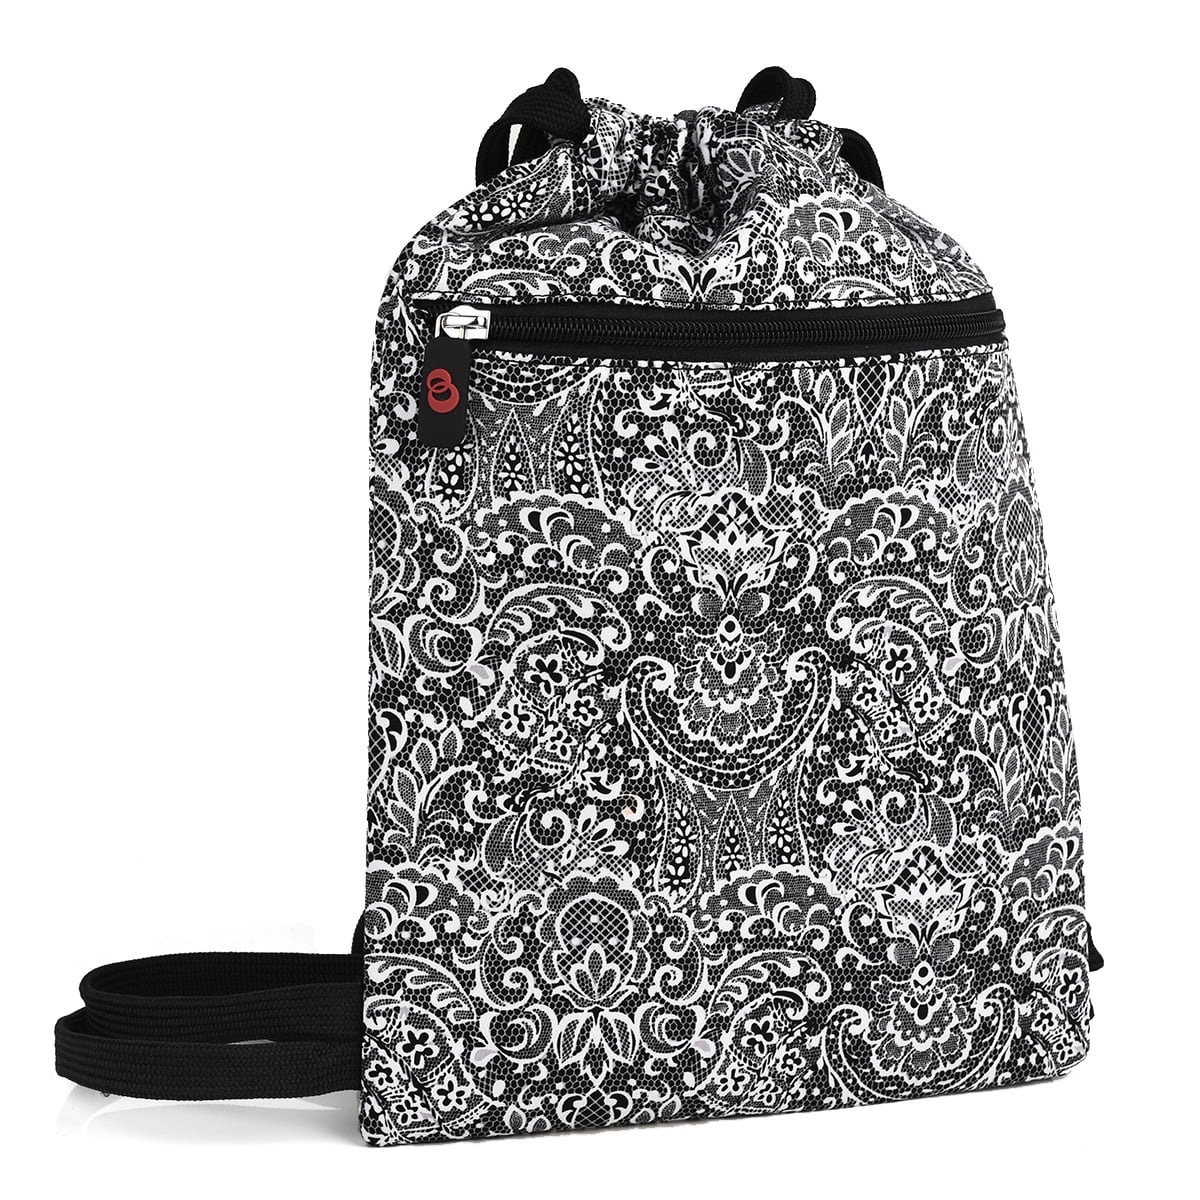 Drawstring Backpack With Monochrome Floral Print String Bag Foldable Sackpack For Gym Sport Traveling Yoga School